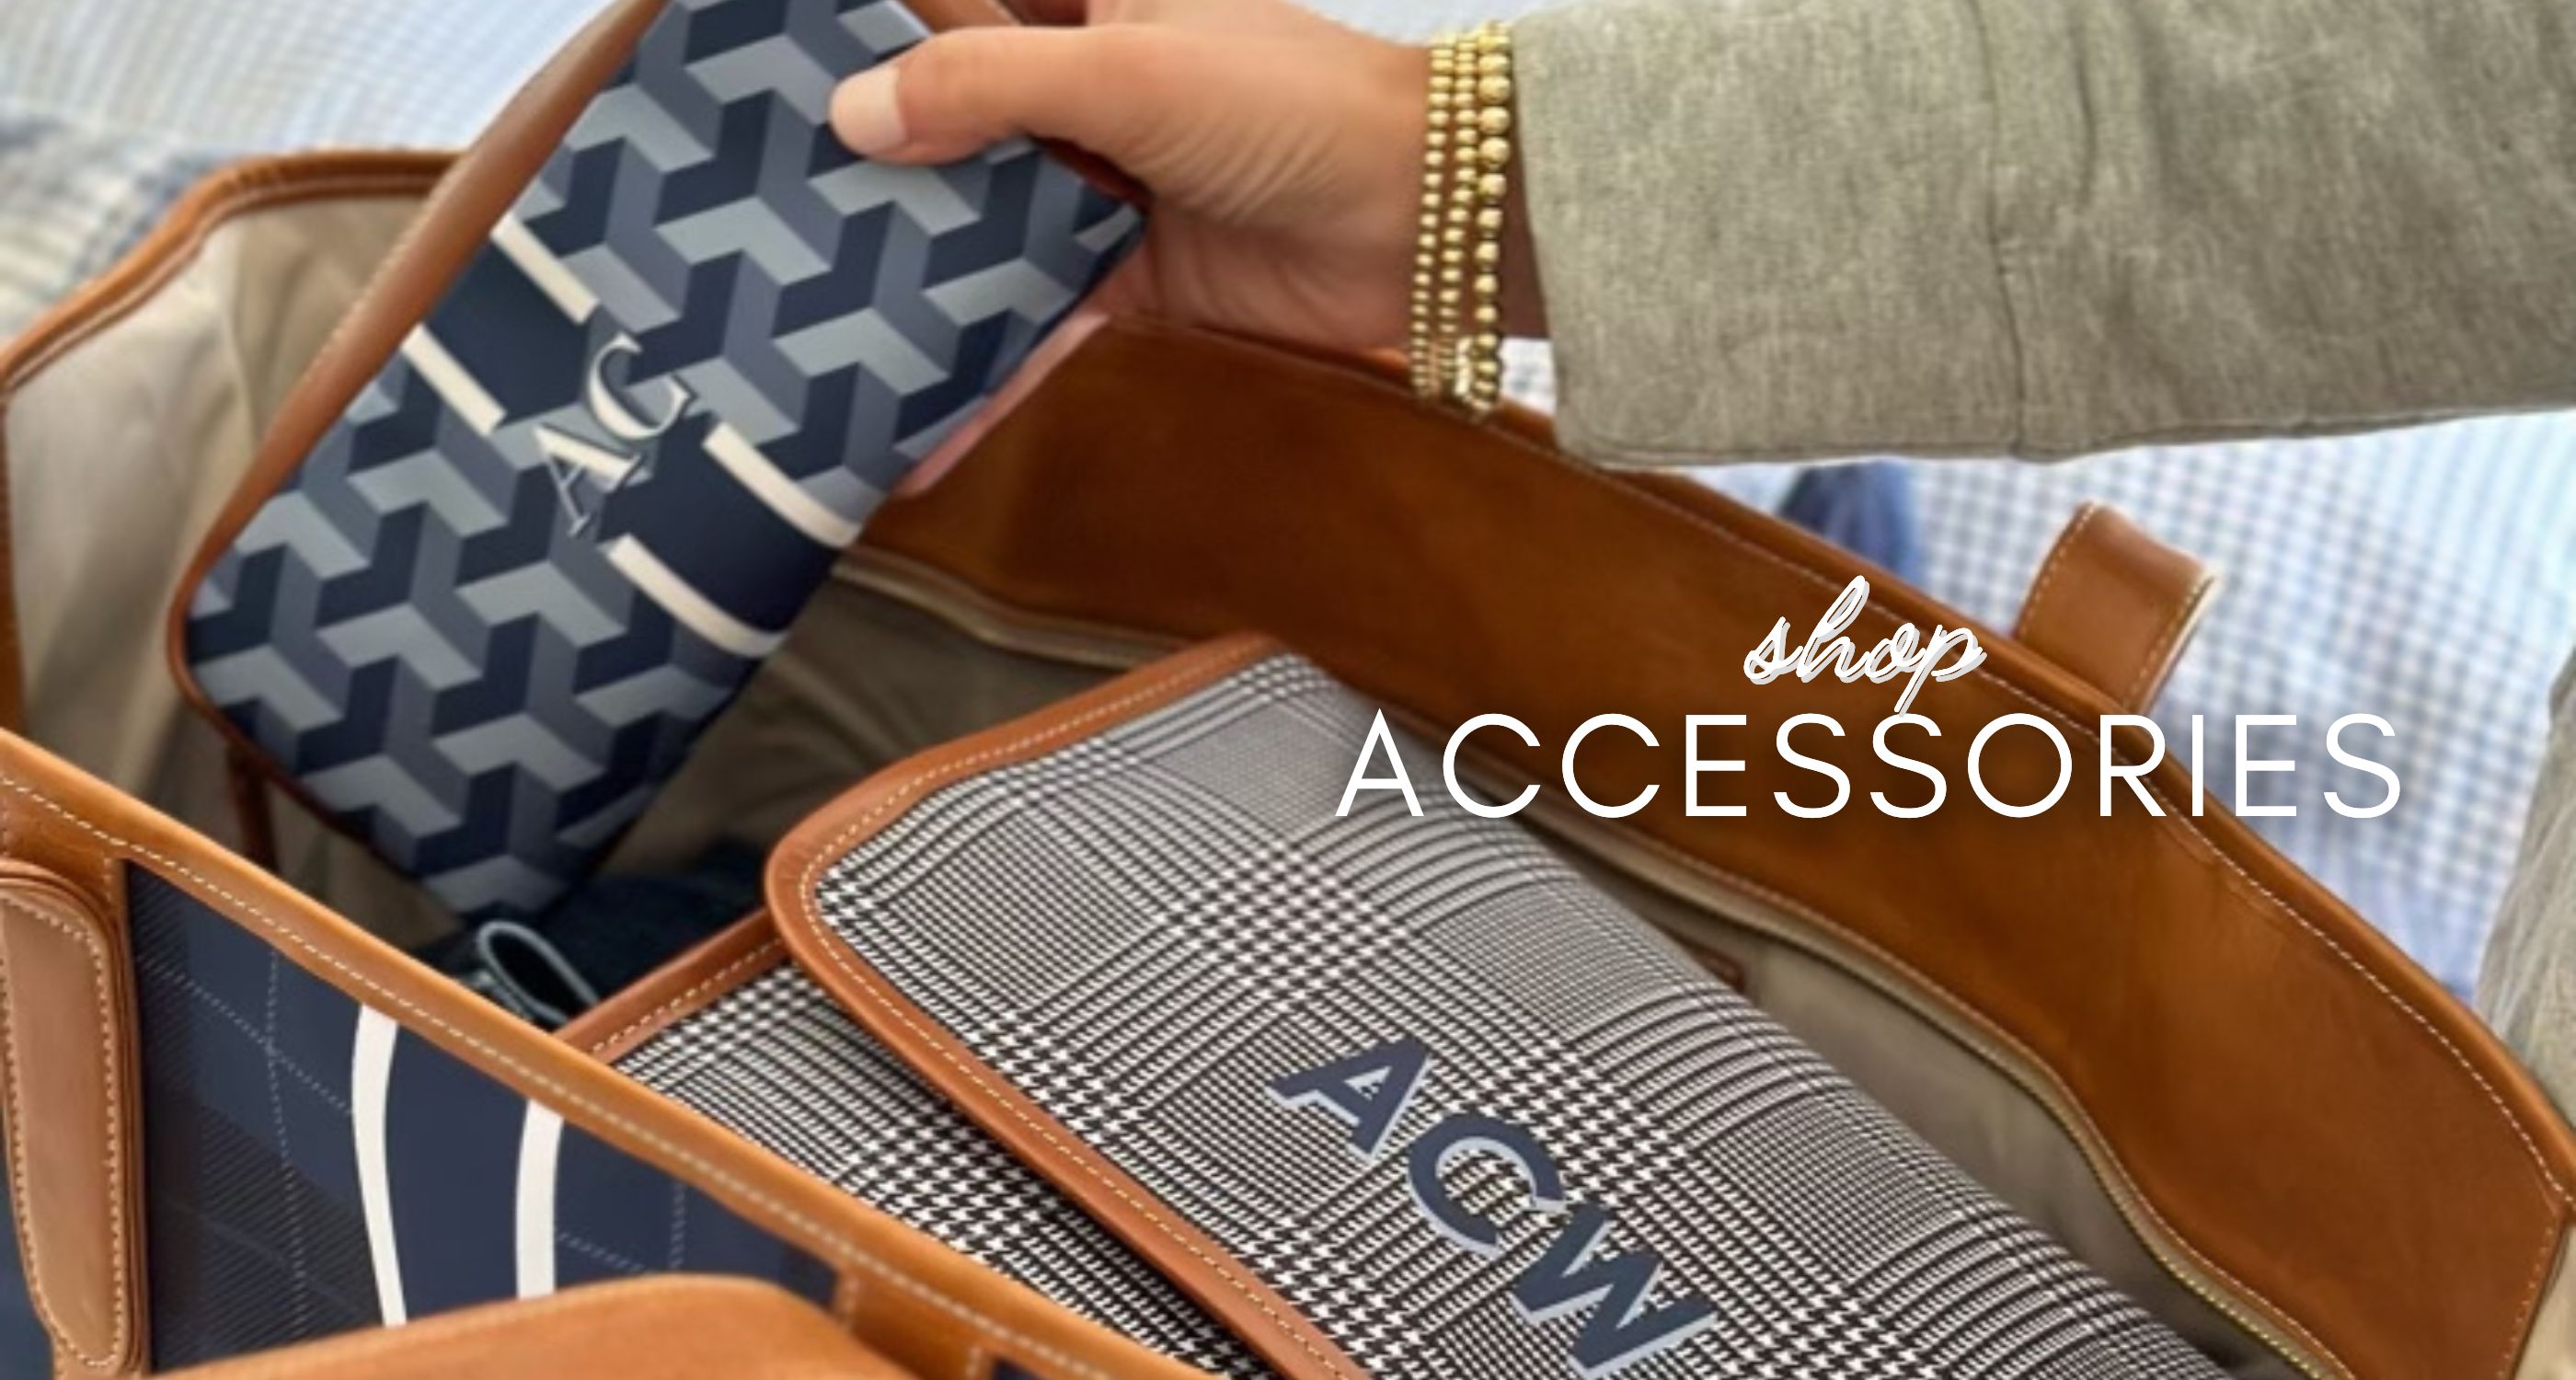 Accessories & Small Bags